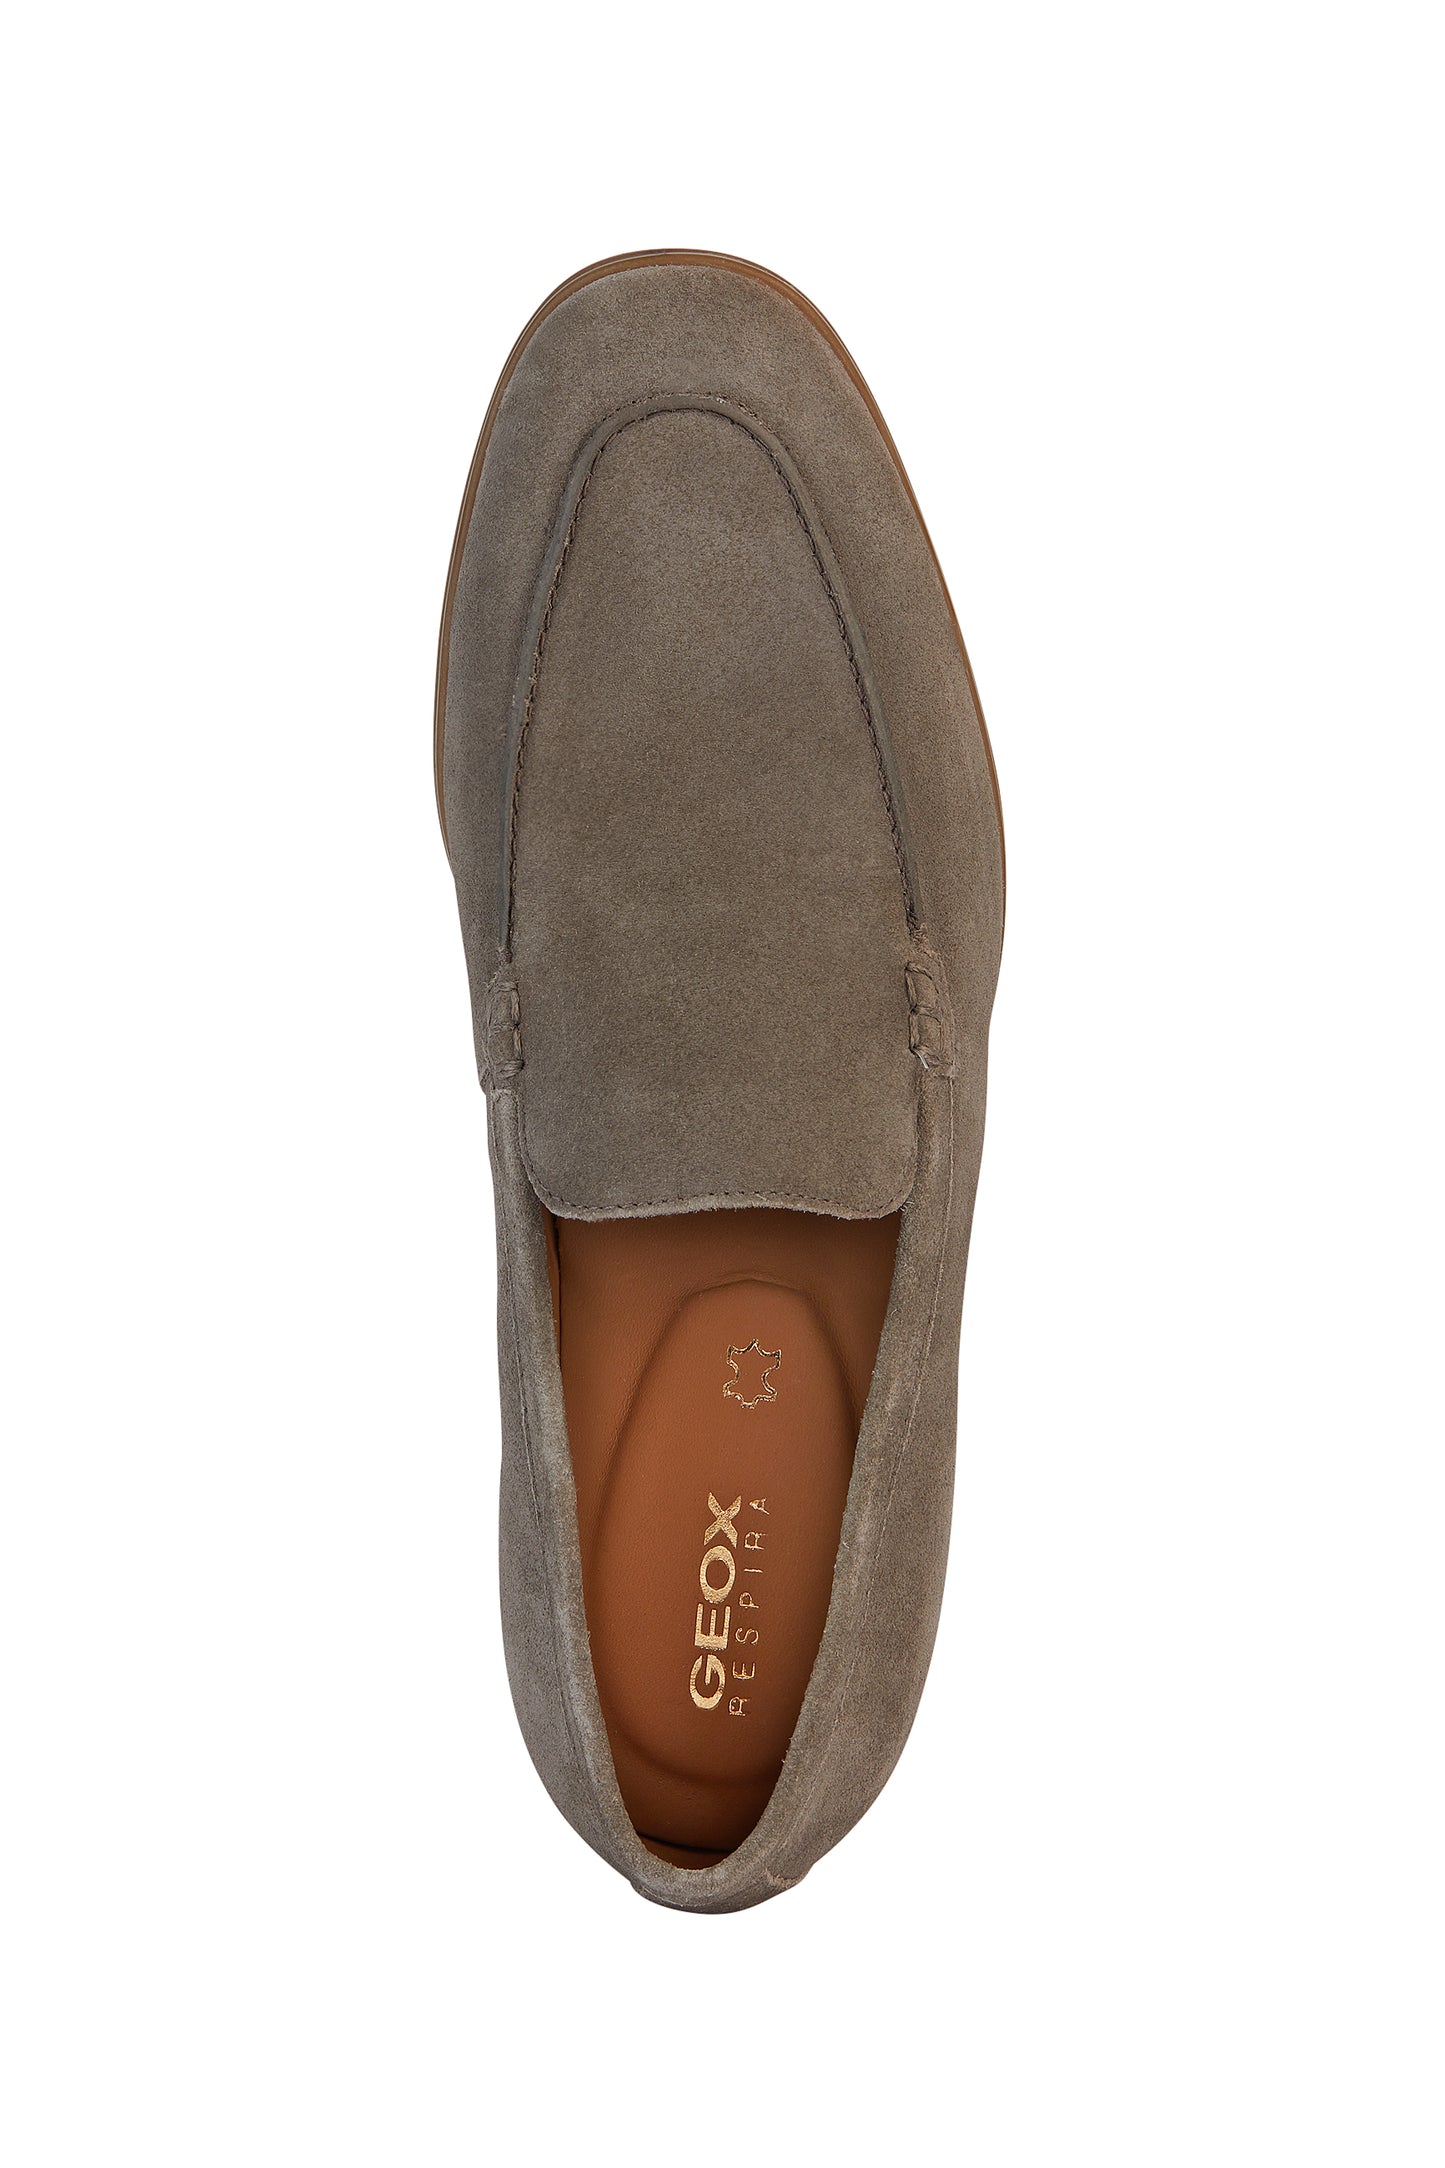 Geox Venzone Suede Moccasins - Taupe